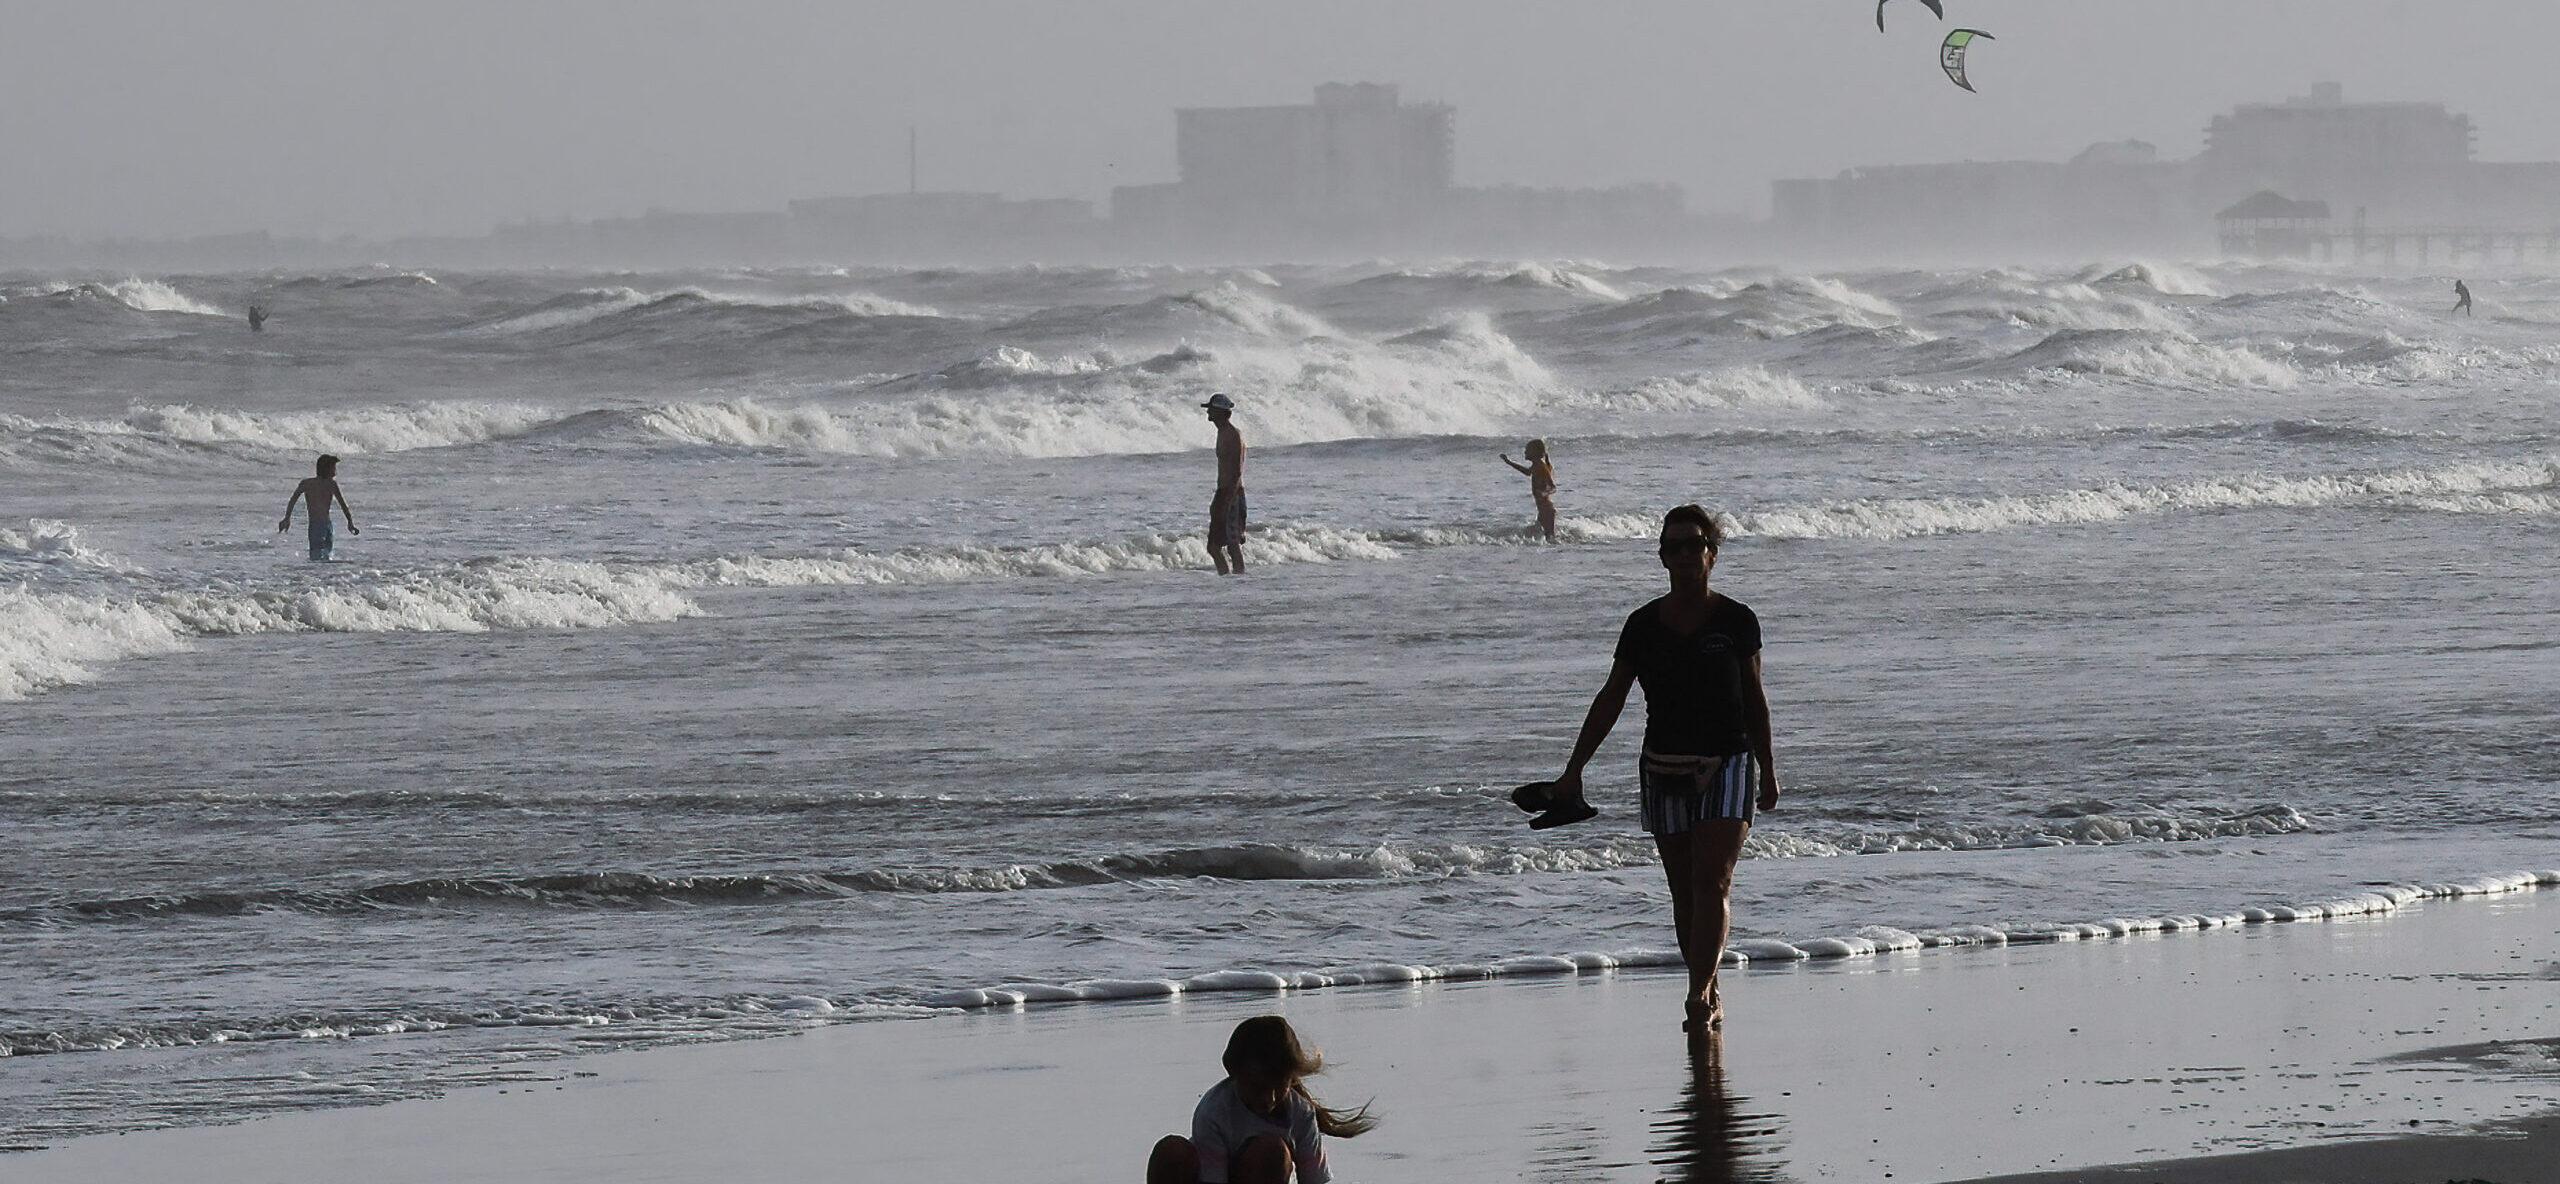 Florida Confirms Five Deaths From Flesh-Eating Bacteria This Year